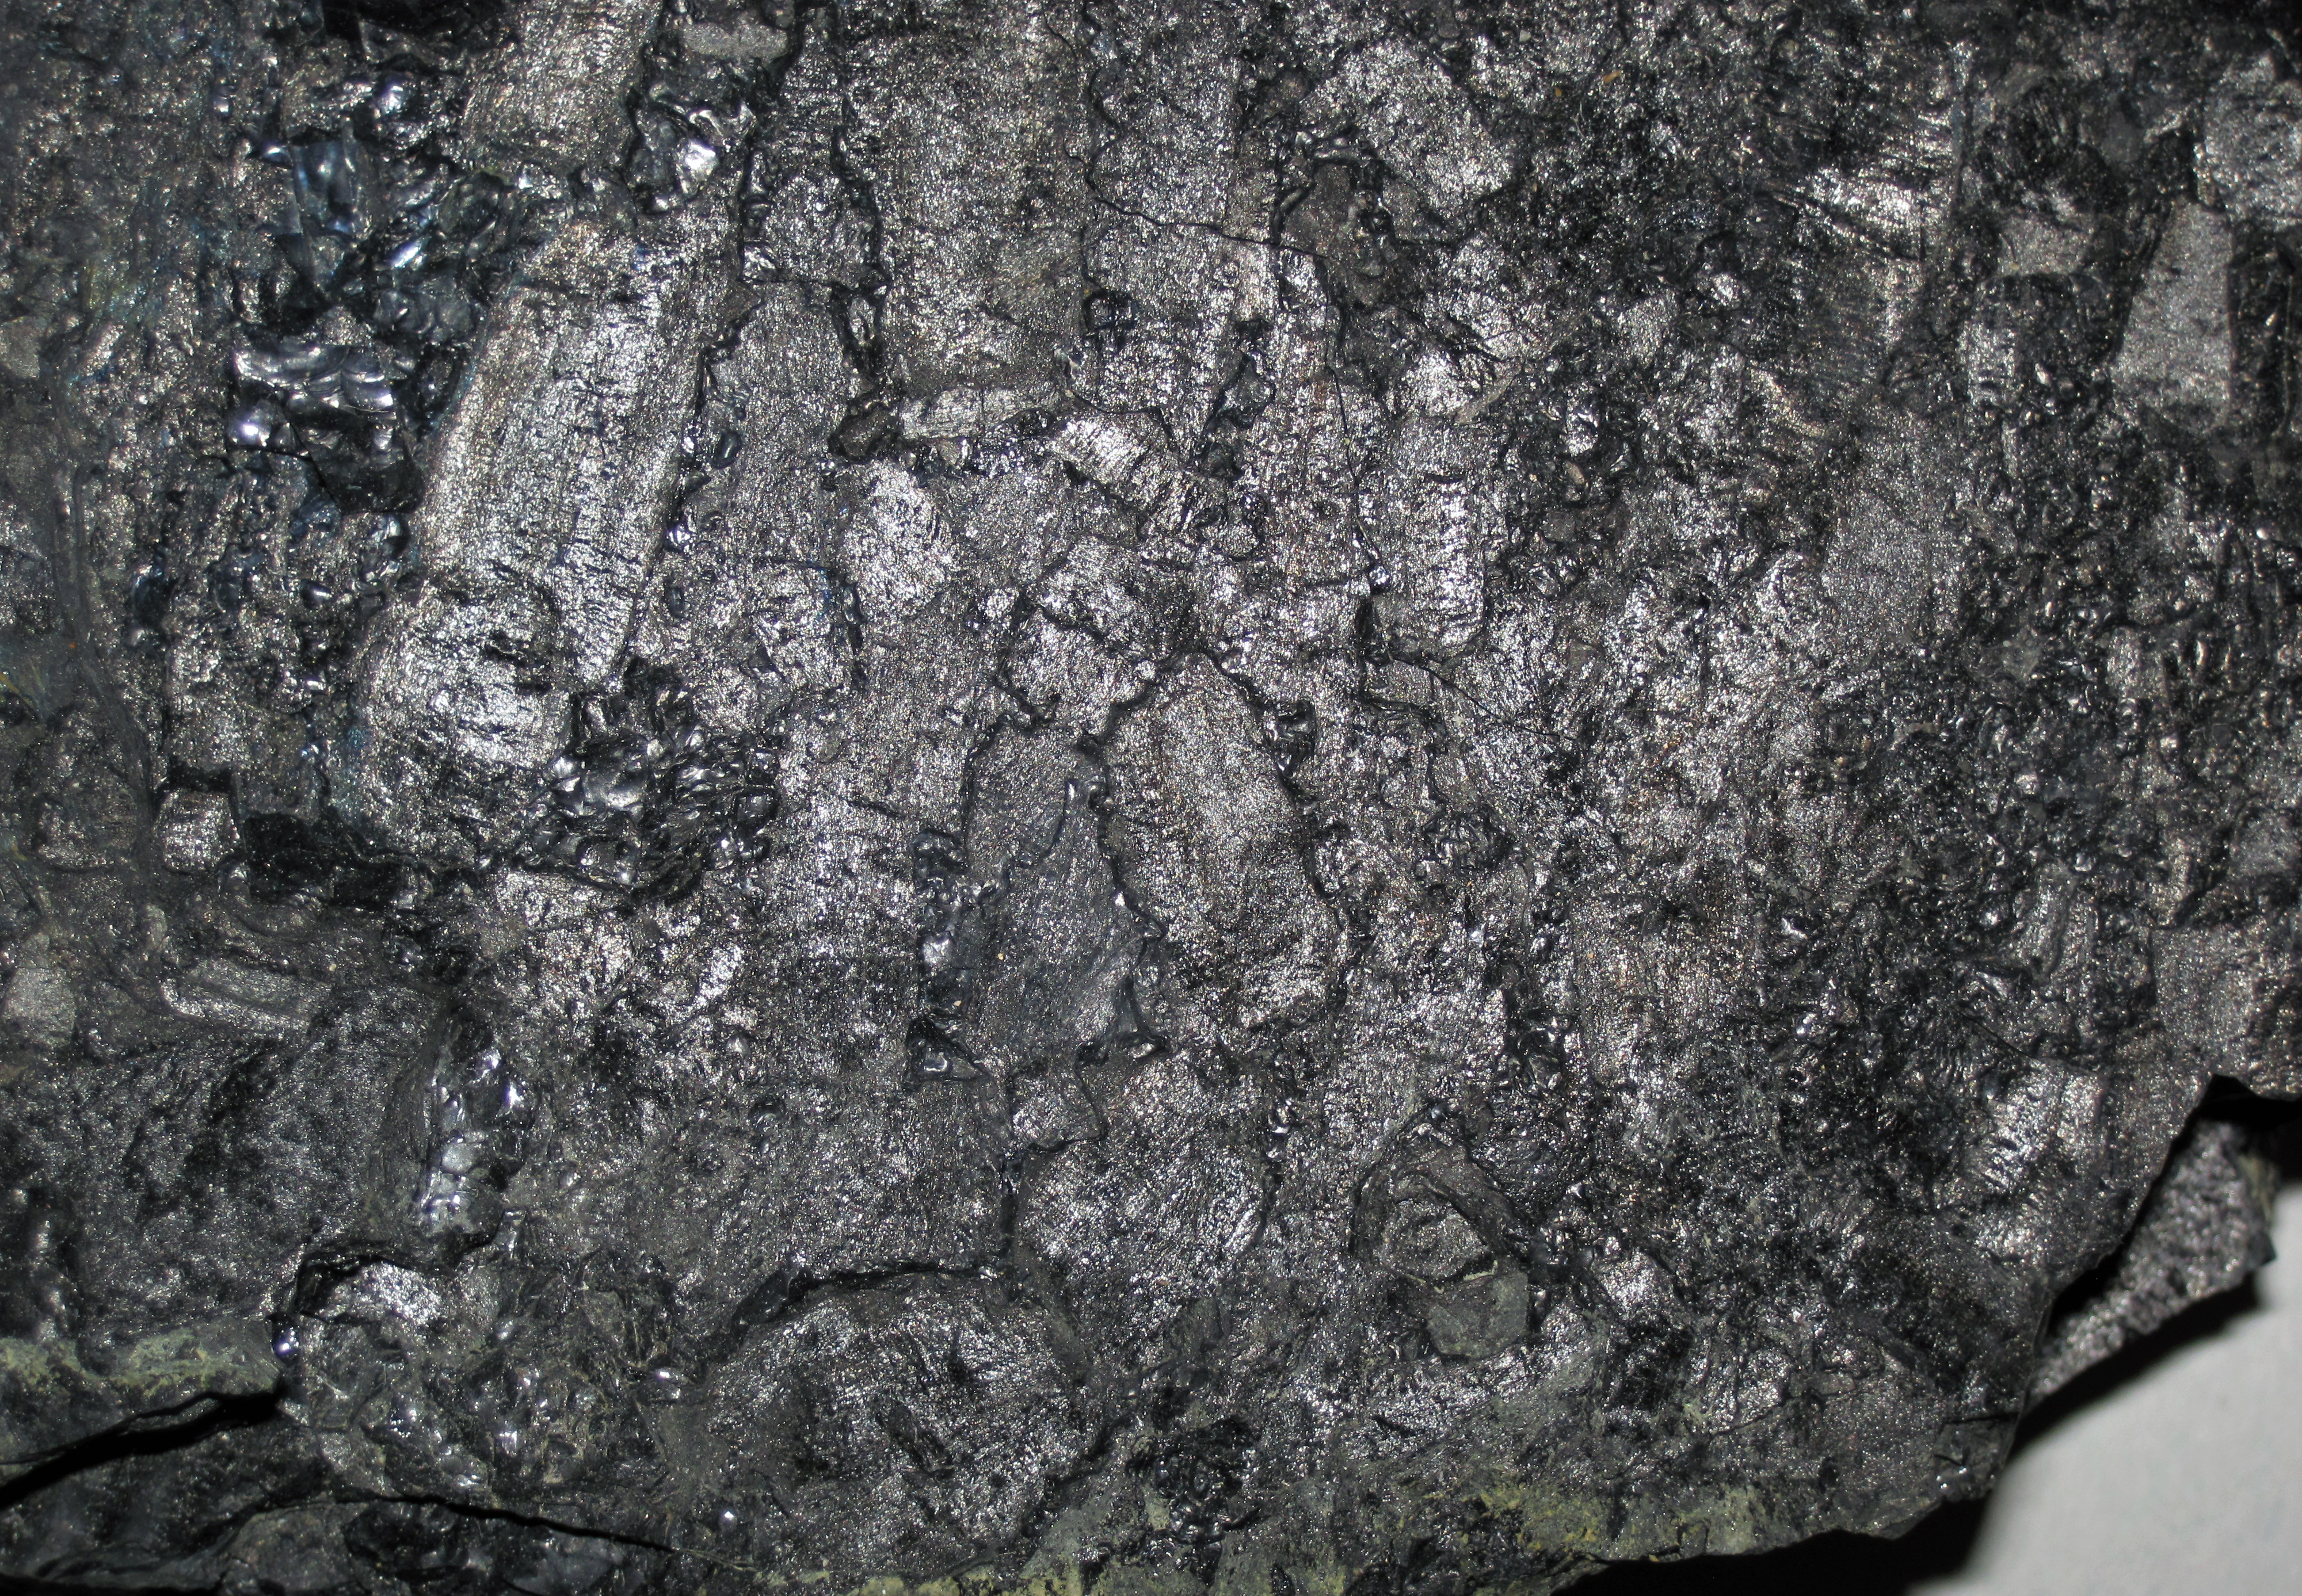 Fossil_charcoal_in_bituminous_coal_(Pikeville_Formation,_Middle_Pennsylvanian;_Rt._15_roadcut_north_of_Jackson,_Kentucky,_USA)_2.jpg